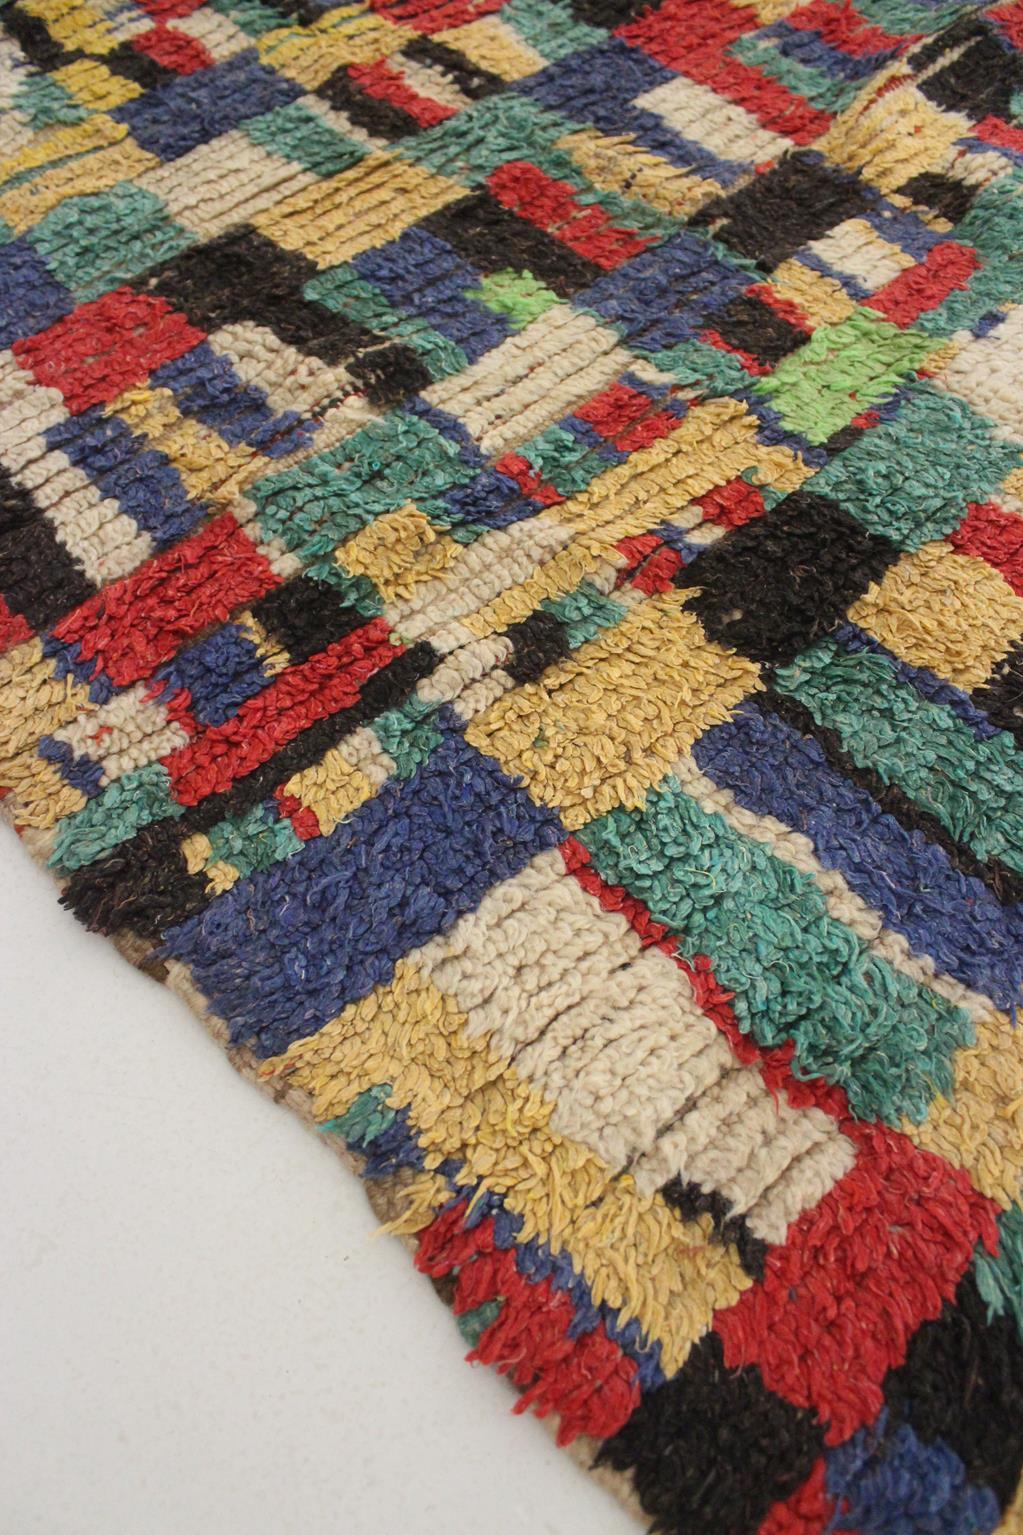 Vintage Moroccan Azilal rug - Green/blue/red/yellow - 3.3x6.8feet / 102x208cm For Sale 1